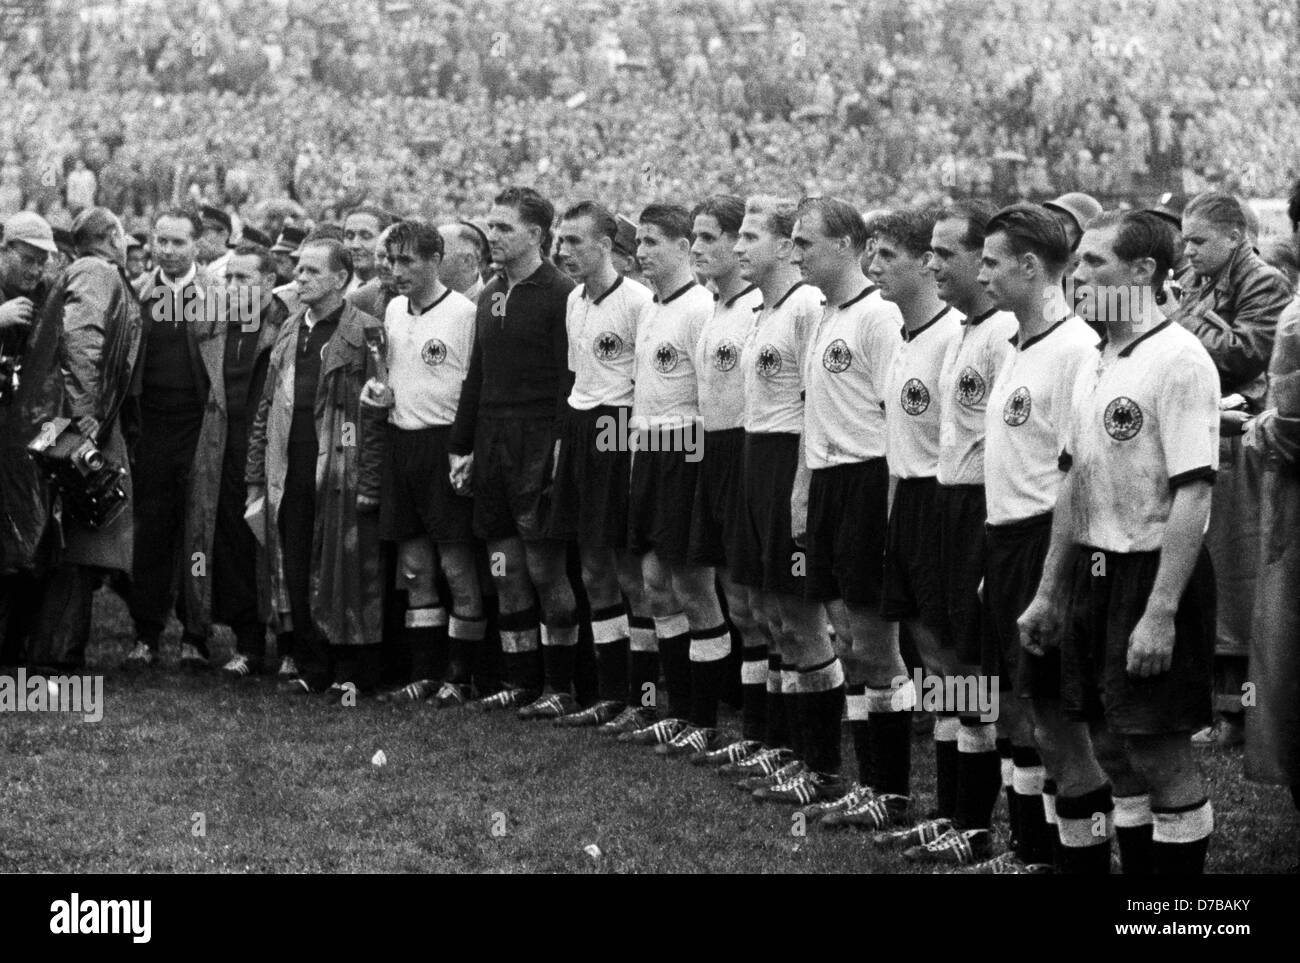 After winning 3:2 against Hungary in the 1954 FIFA World Cup final the German national football team is pronounced world champion. Line-up at the victory ceremony: Coach Sepp Herberger, team captain Fritz Walter with the conquered Jules-Rimet-Cup in his hand, goalkeeper Toni Turek, Horst Eckel, Helmut Rahn, Ottmar Walter, Werner Liebrich, Jupp Posipal, Hans Schäfer, Werner Kohlmeyer, Karl Mai and Max Morlock. Stock Photo